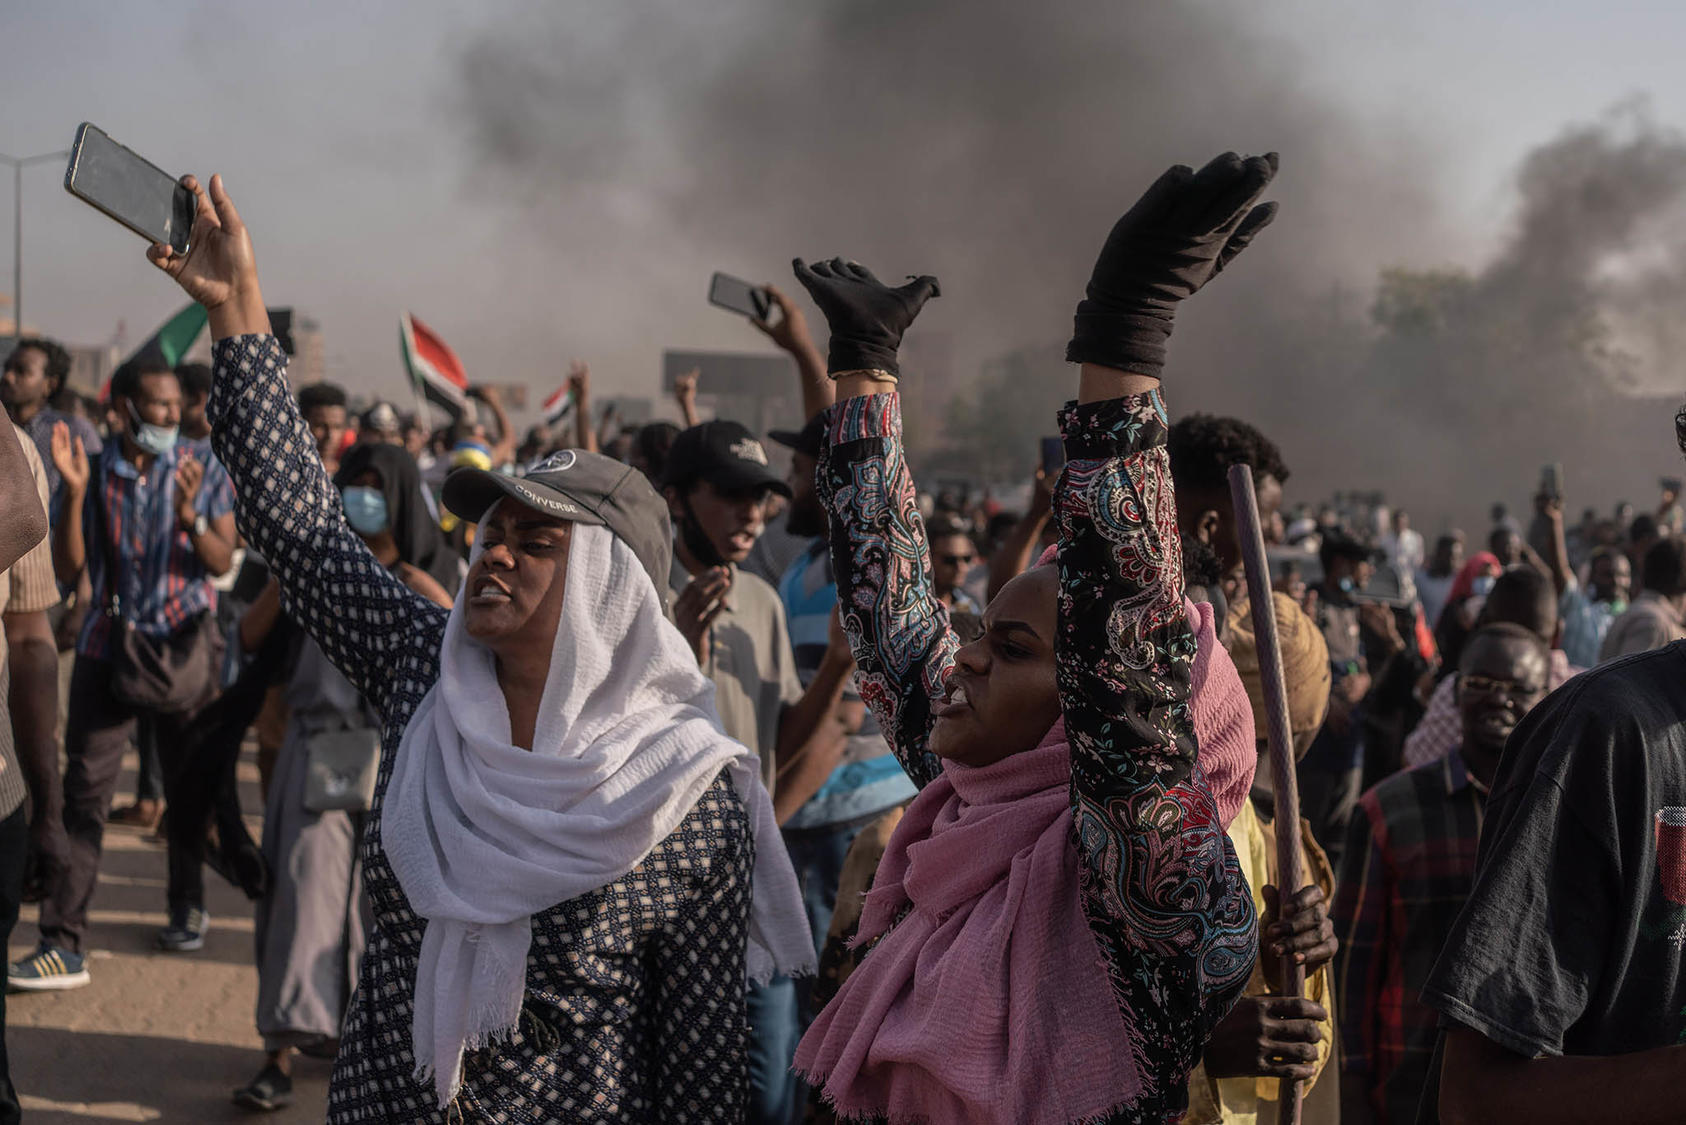 Demonstrators in Khartoum, Sudan mark the third anniversary of autocrat Omar al-Bashir’s ouster, April 6, 2022. Over the last eight months, at least 111 Sudanese have been killed in a military crackdown on protests. (Abdulmonam Eassa/The New York Times)